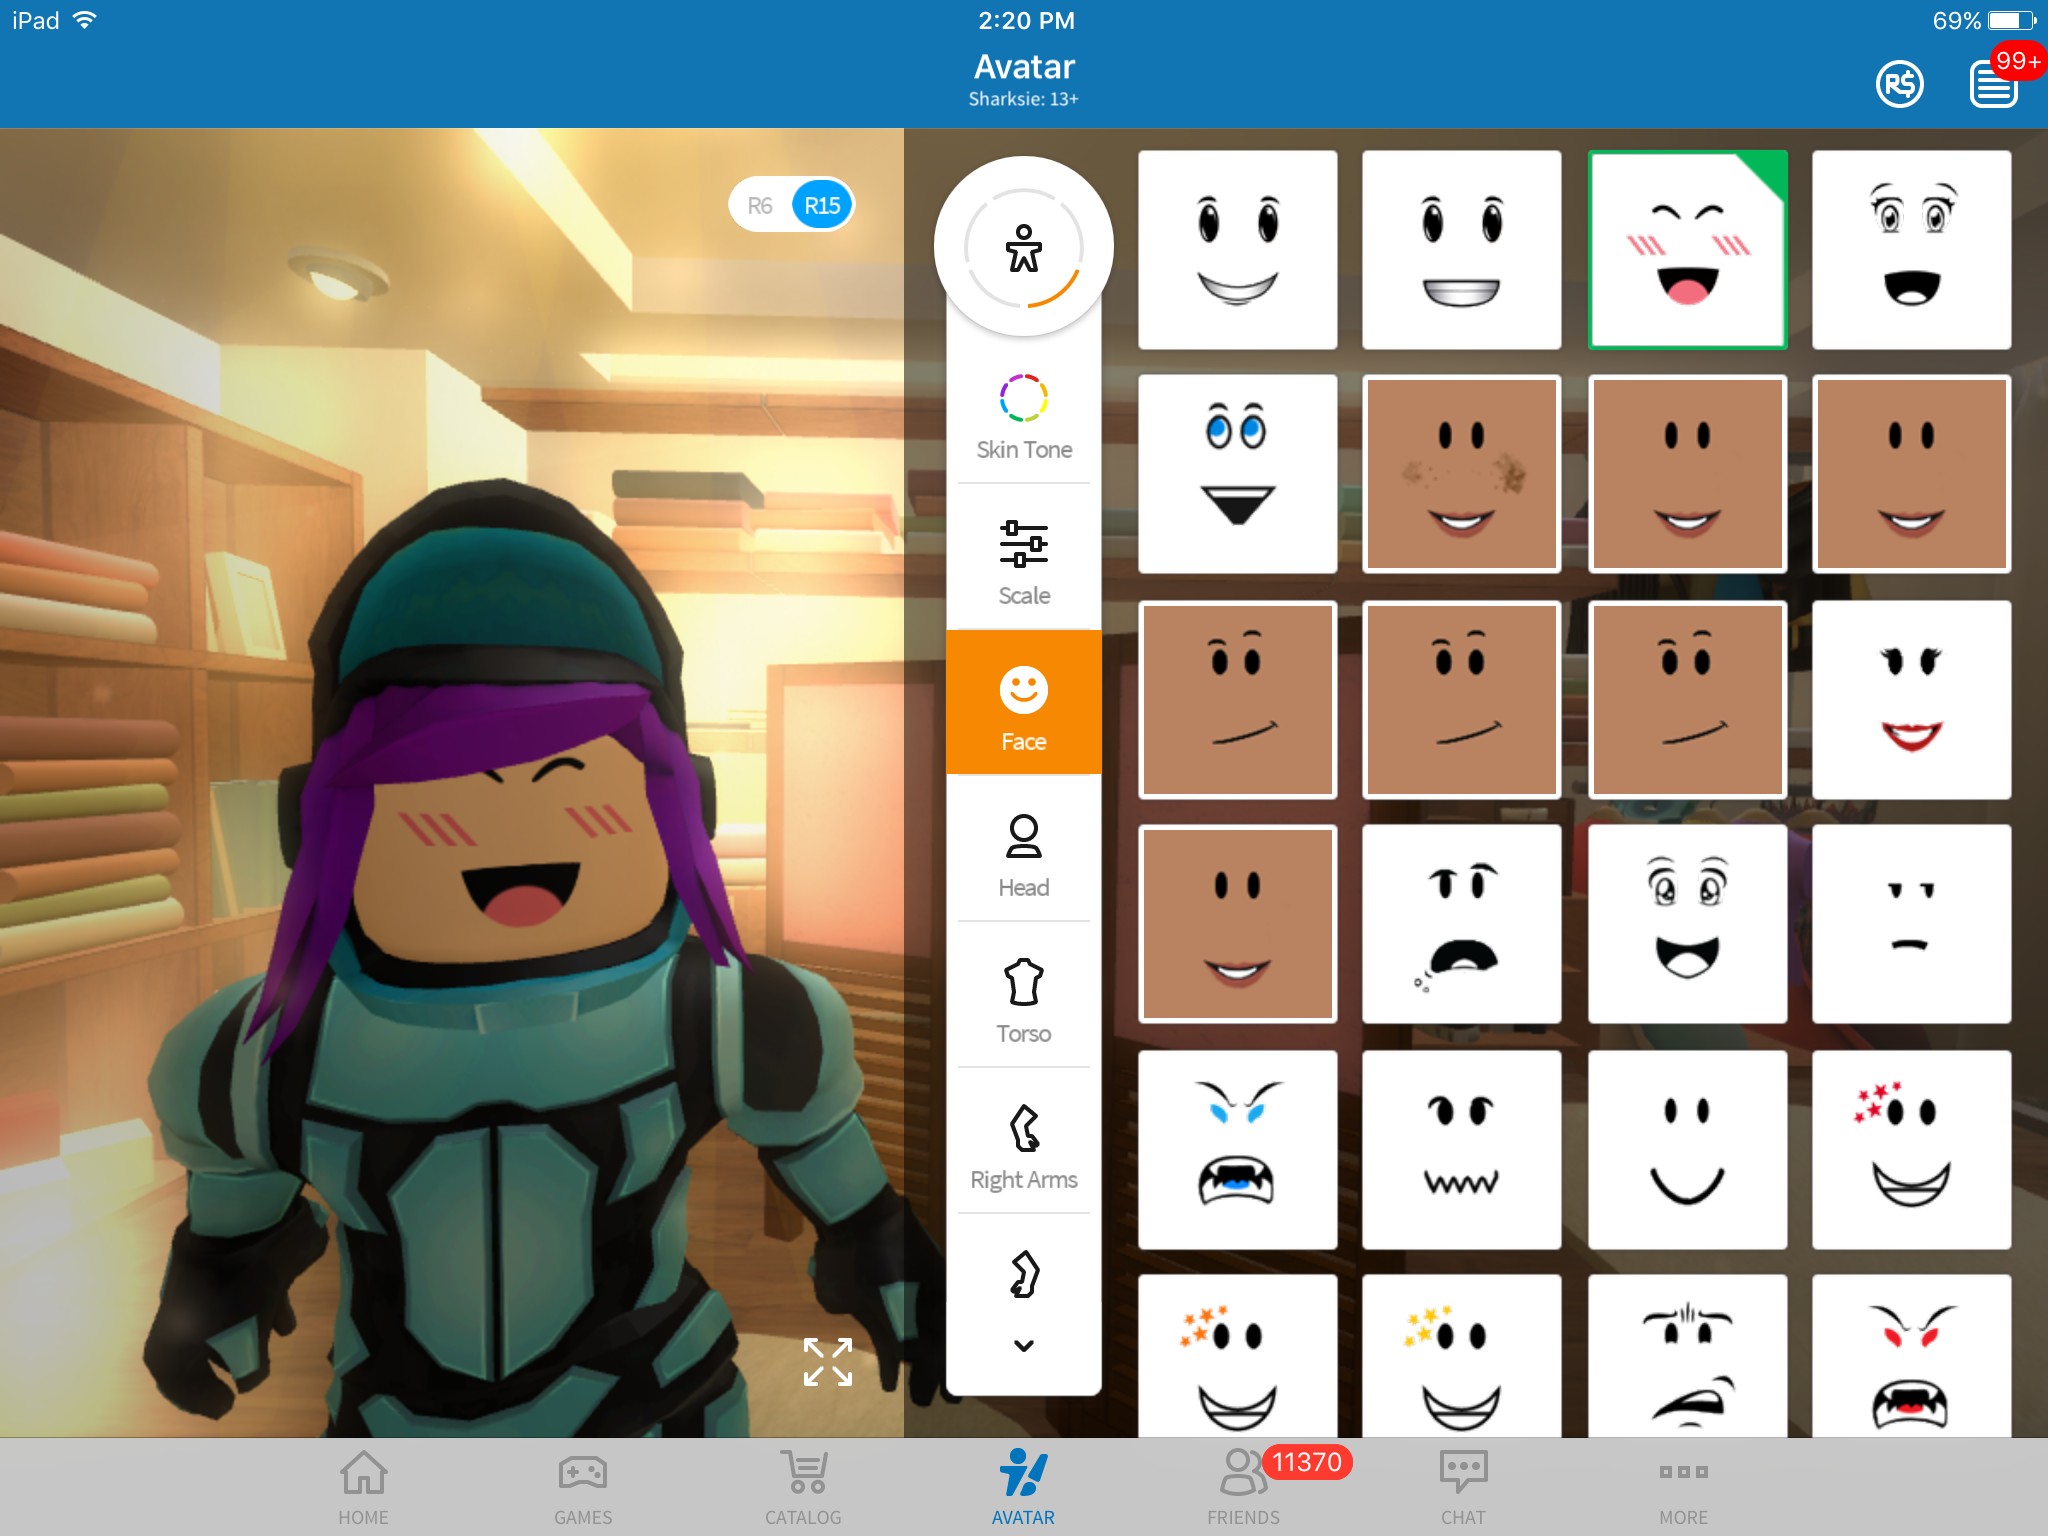 How To Make Your Own Clothes On Roblox On Ipad